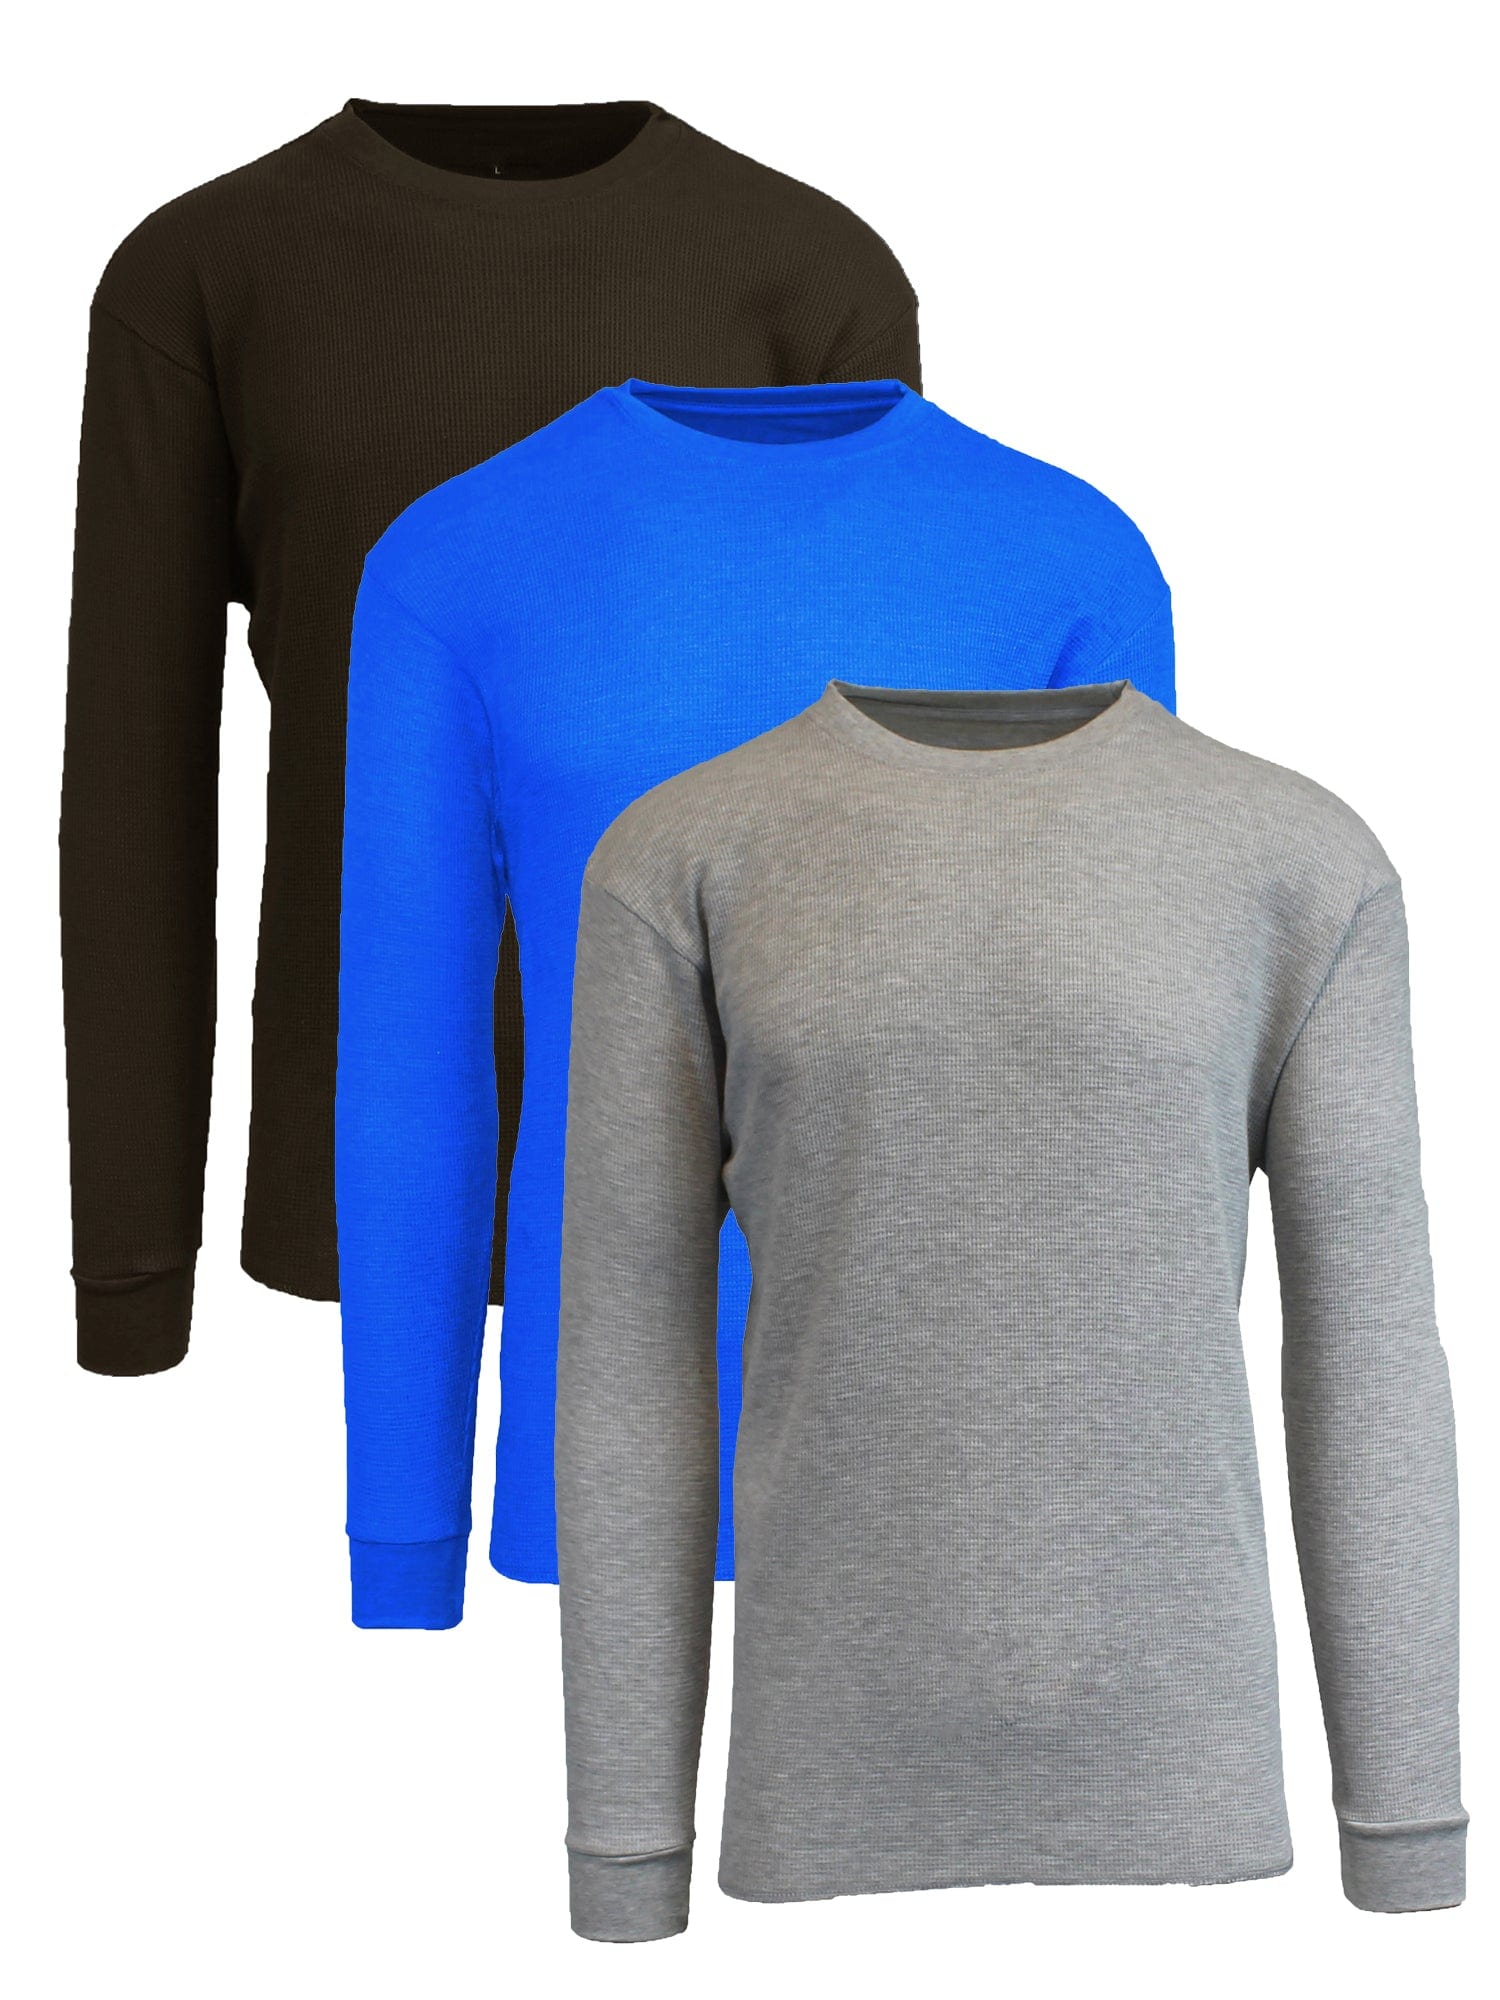 Men's Long Sleeve Thermal Shirts (3-Pack) - GalaxybyHarvic